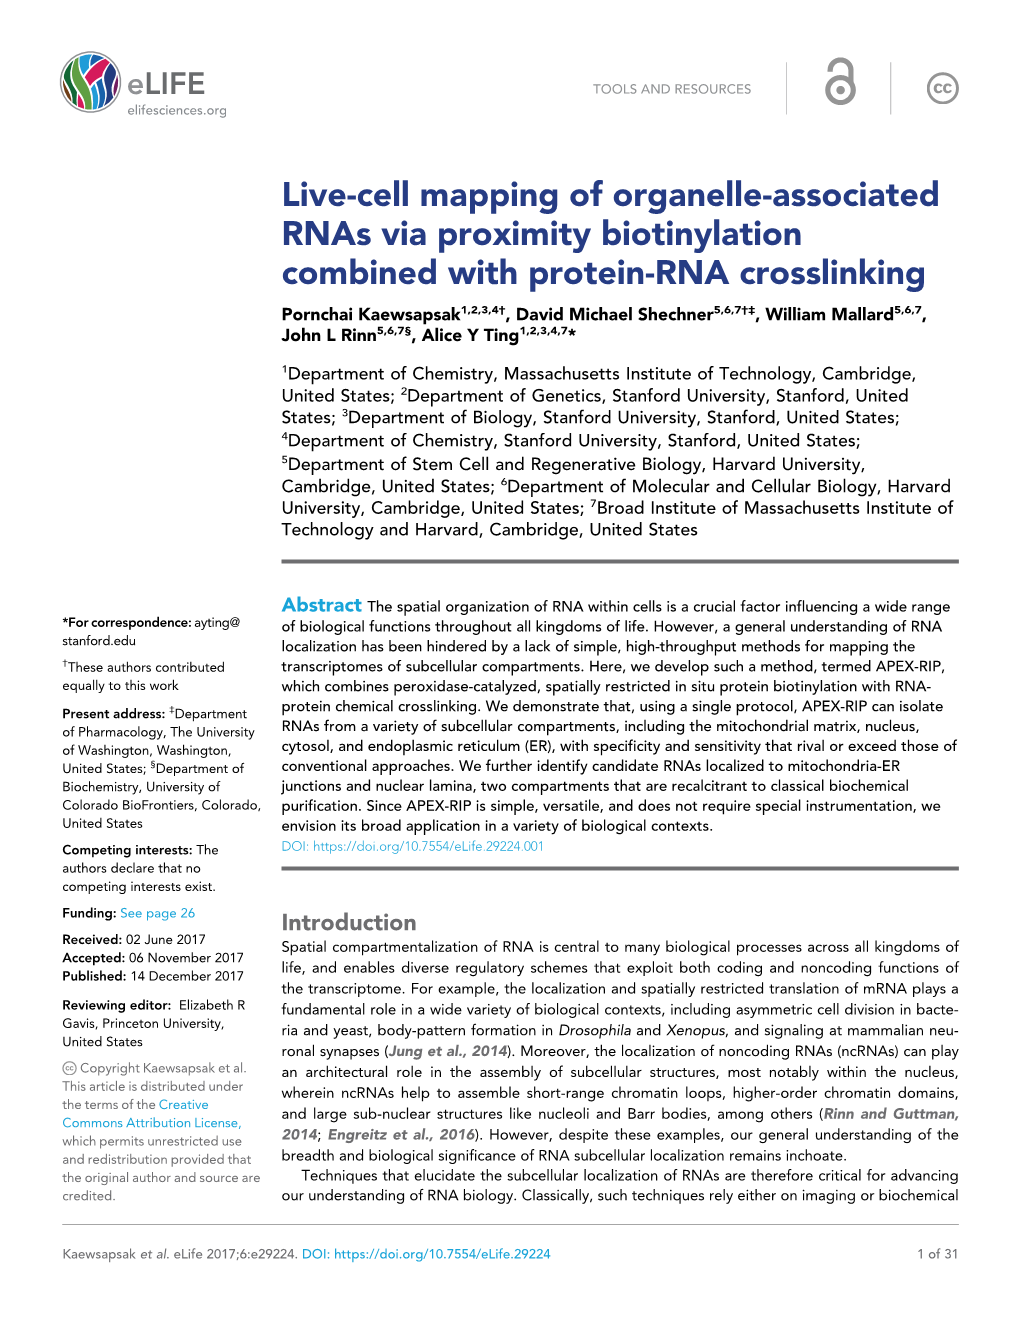 Live-Cell Mapping of Organelle-Associated Rnas Via